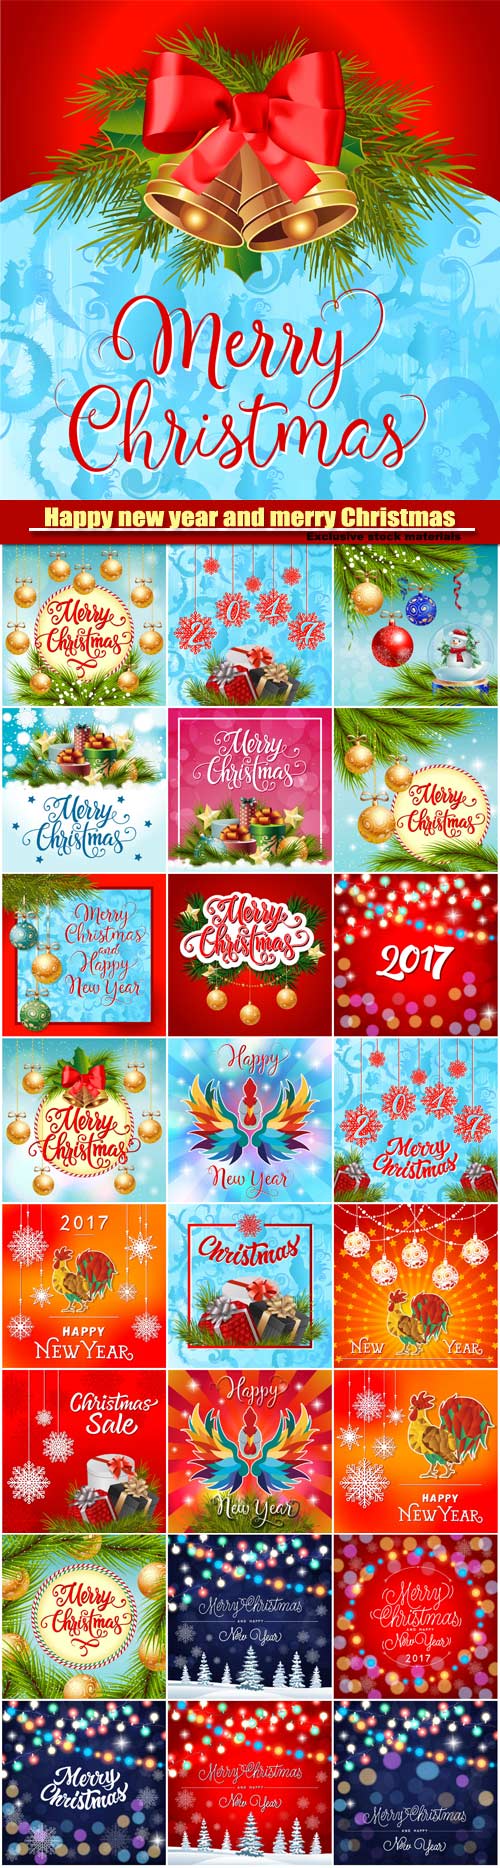 Merry Christmas and Happy New Year, decorations,Christmas balls, present bo ...